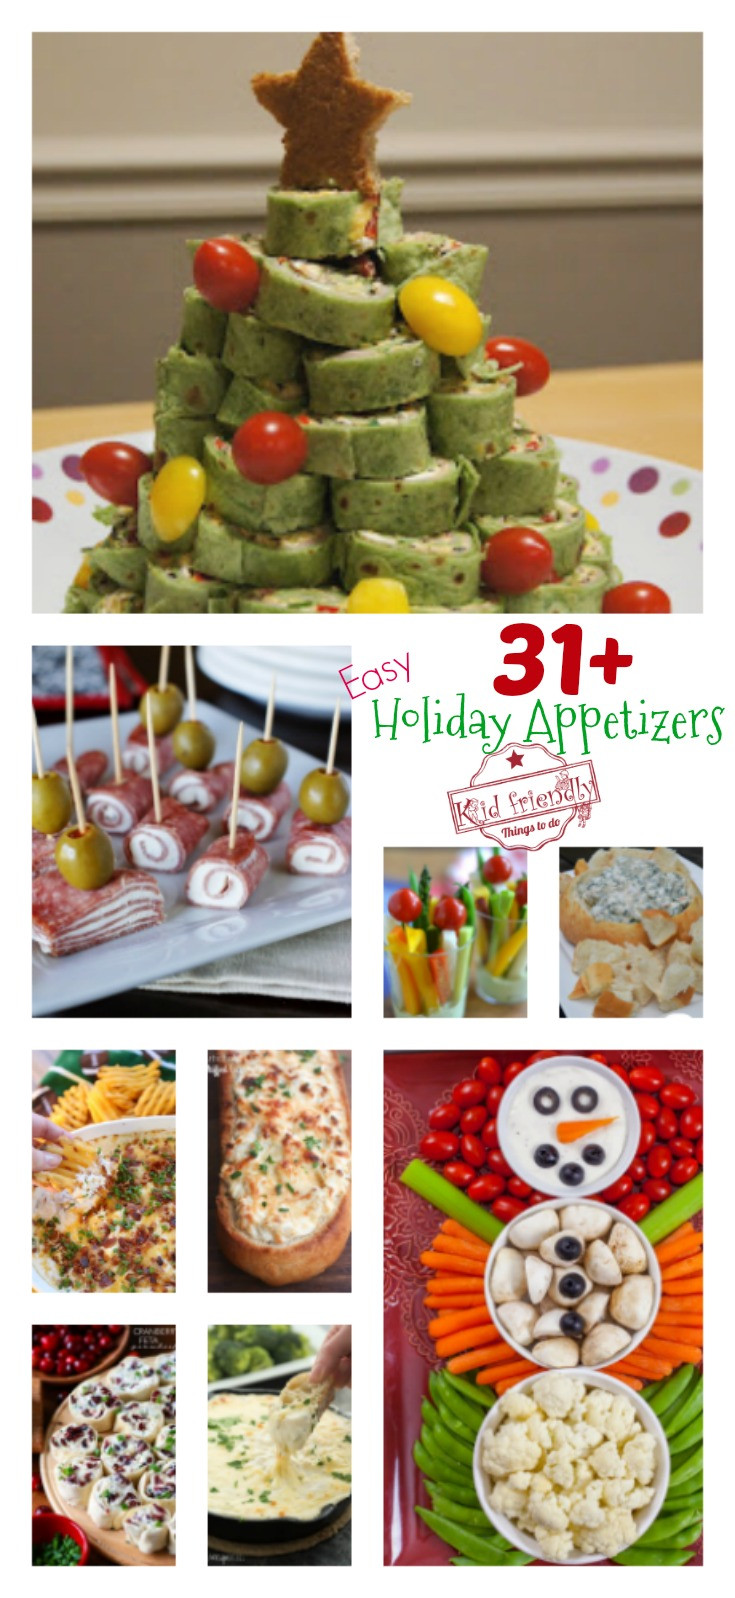 Appetizers For Christmas
 Over 31 Easy Holiday Appetizers to Make for Christmas New